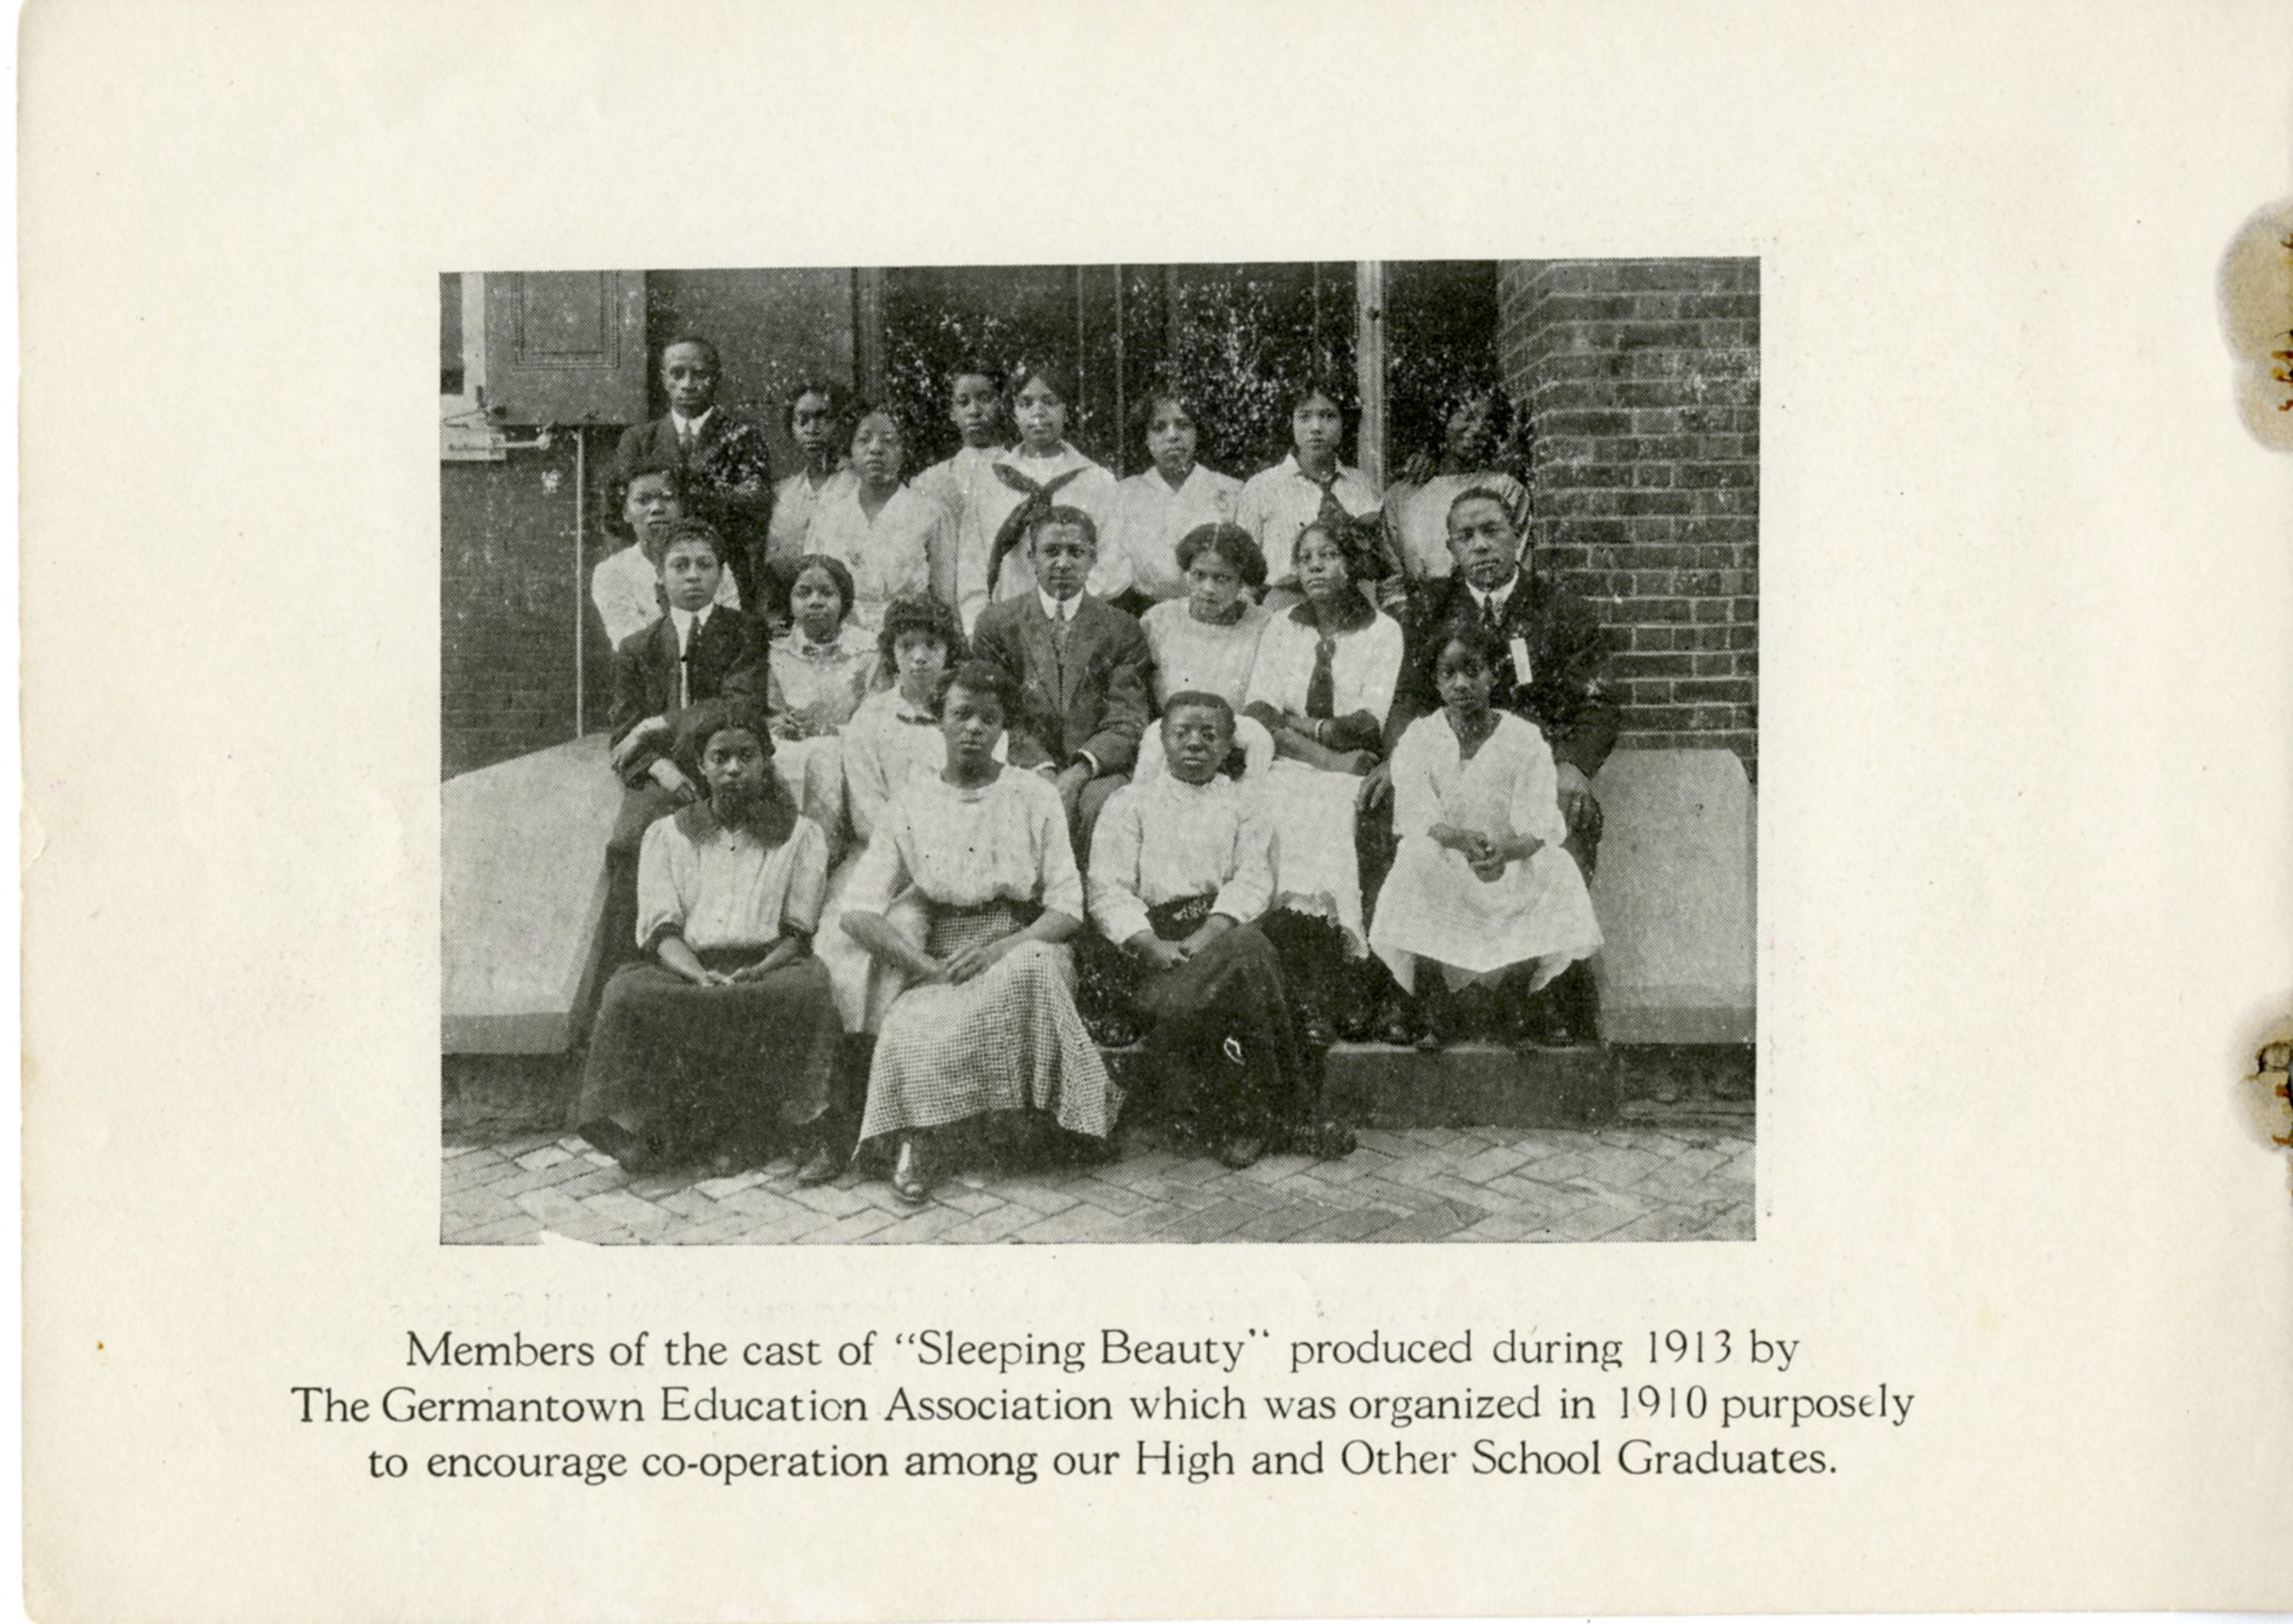 Young Black students pose for a group photo on the steps of a brick building